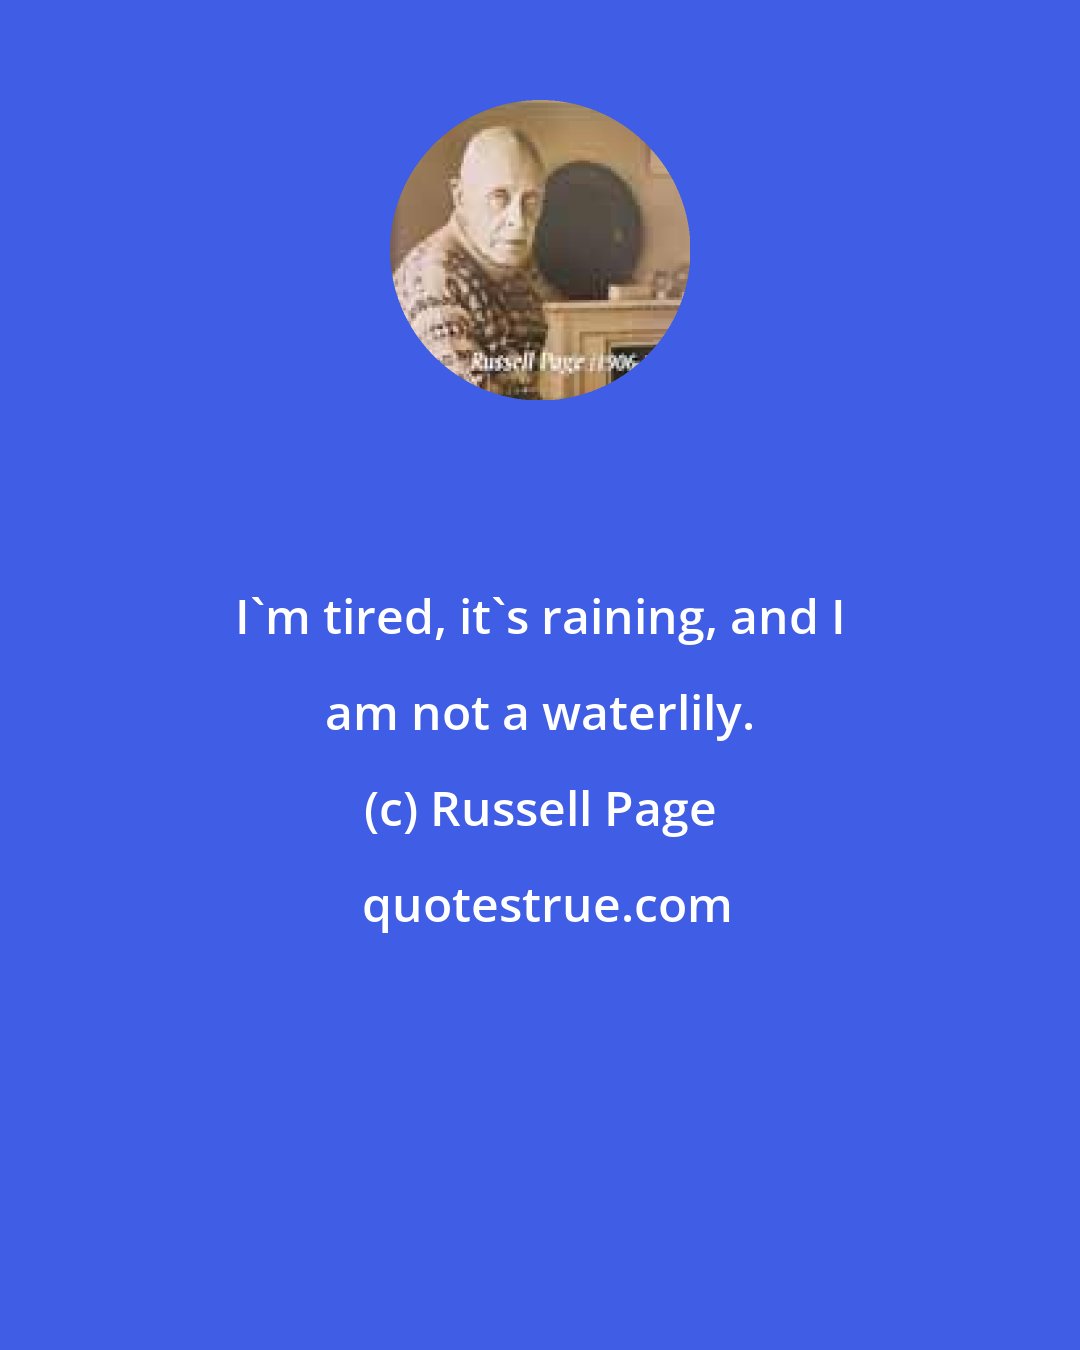 Russell Page: I'm tired, it's raining, and I am not a waterlily.